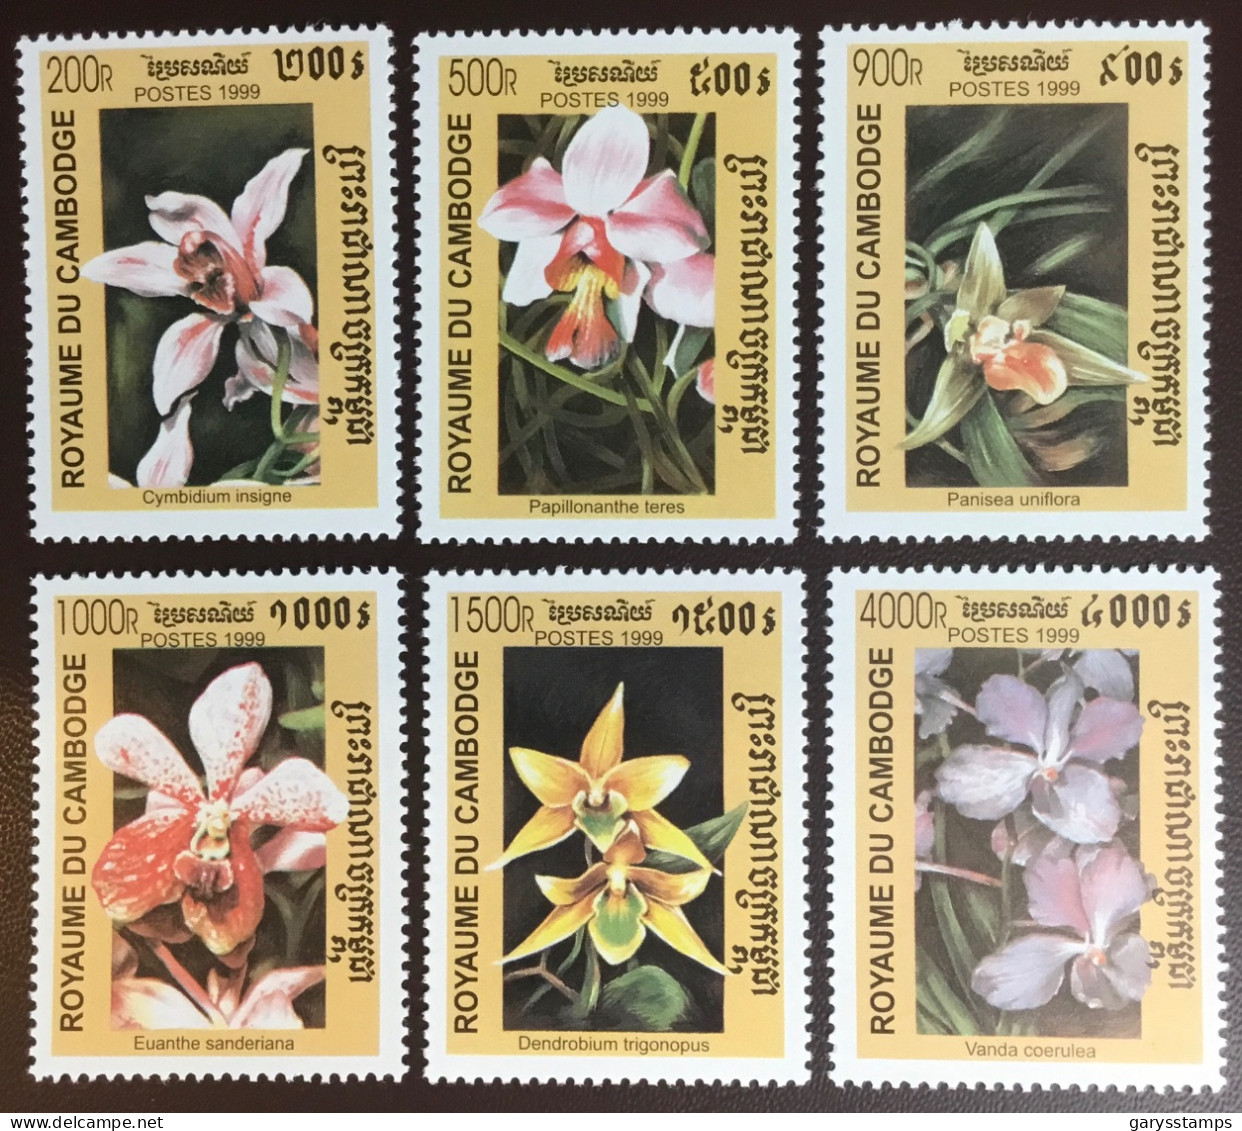 Cambodia 1999 Orchids Flowers MNH - Orchideen